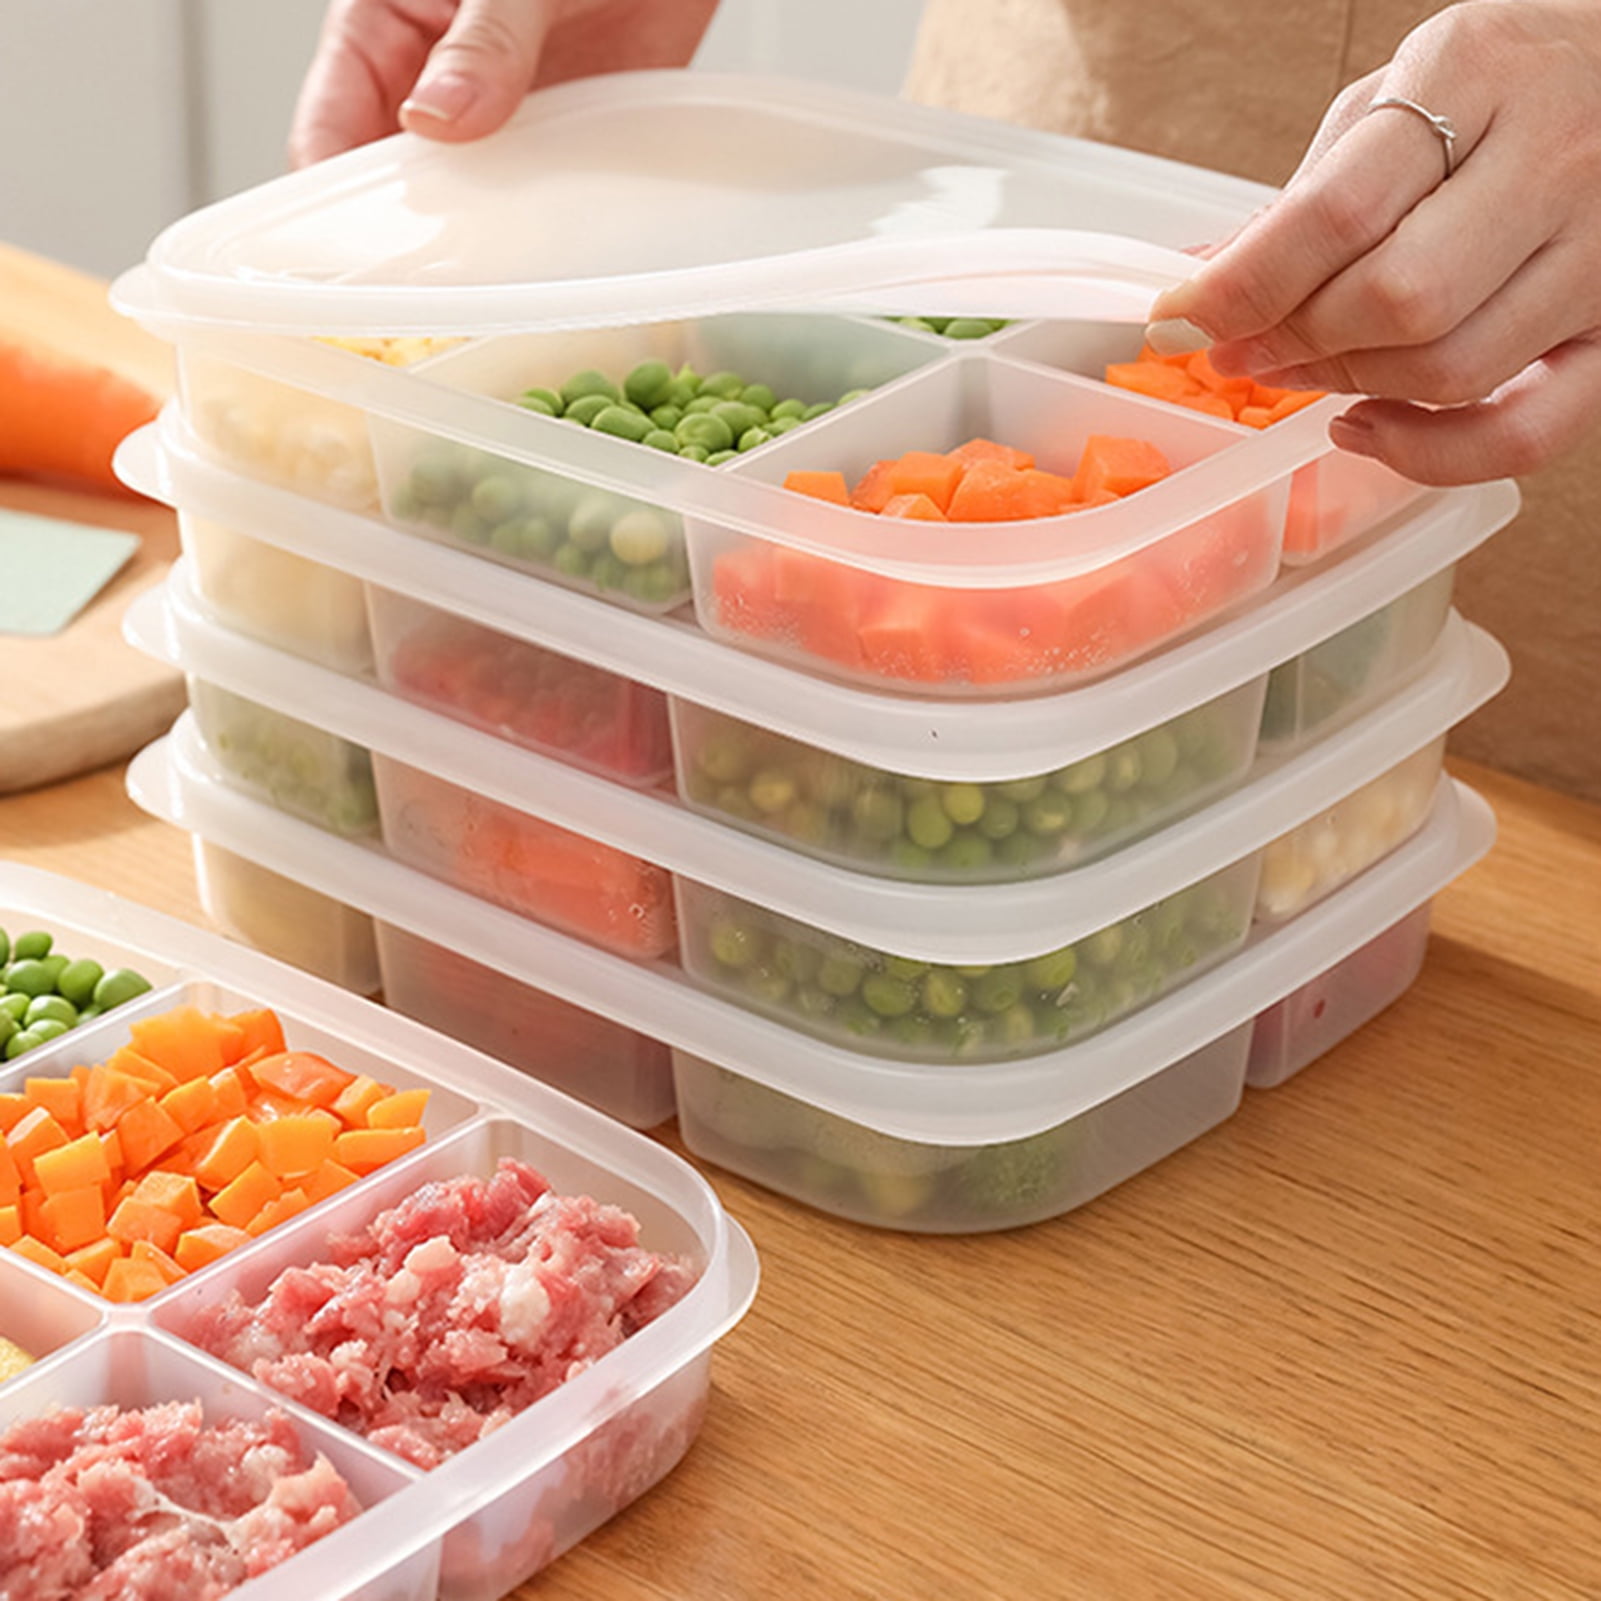 Yesbay Food Storage Box Large Capacity Multi-Compartments Eco